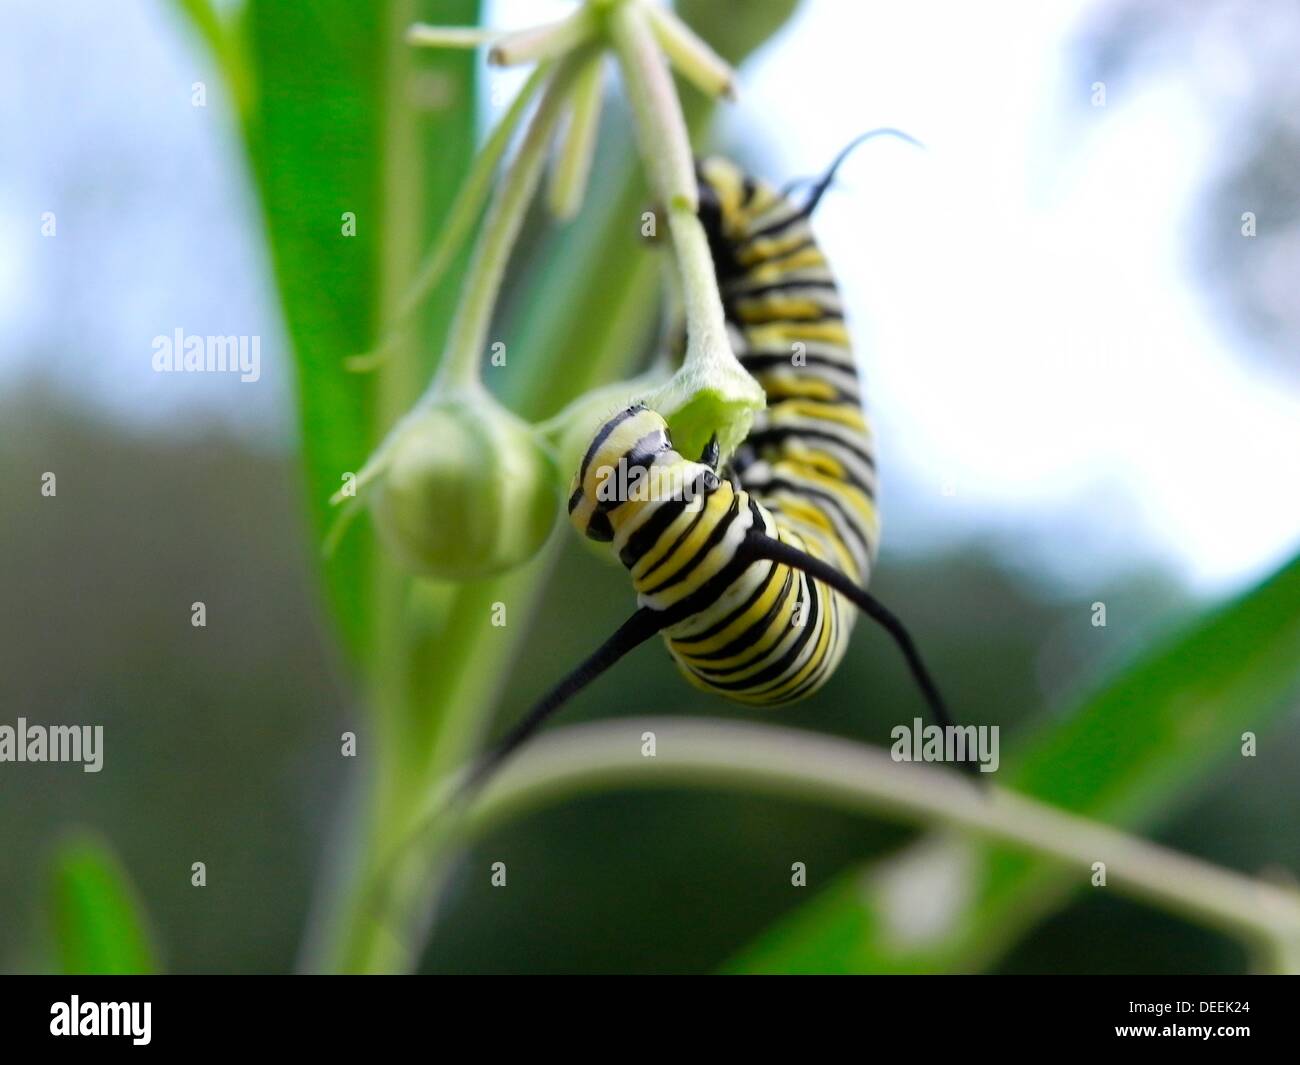 Caterpillar of the Monarch butterfly, Danaus plexippus, eating leaves and flower buds of the Swan Plant Milkweed, also called Stock Photo